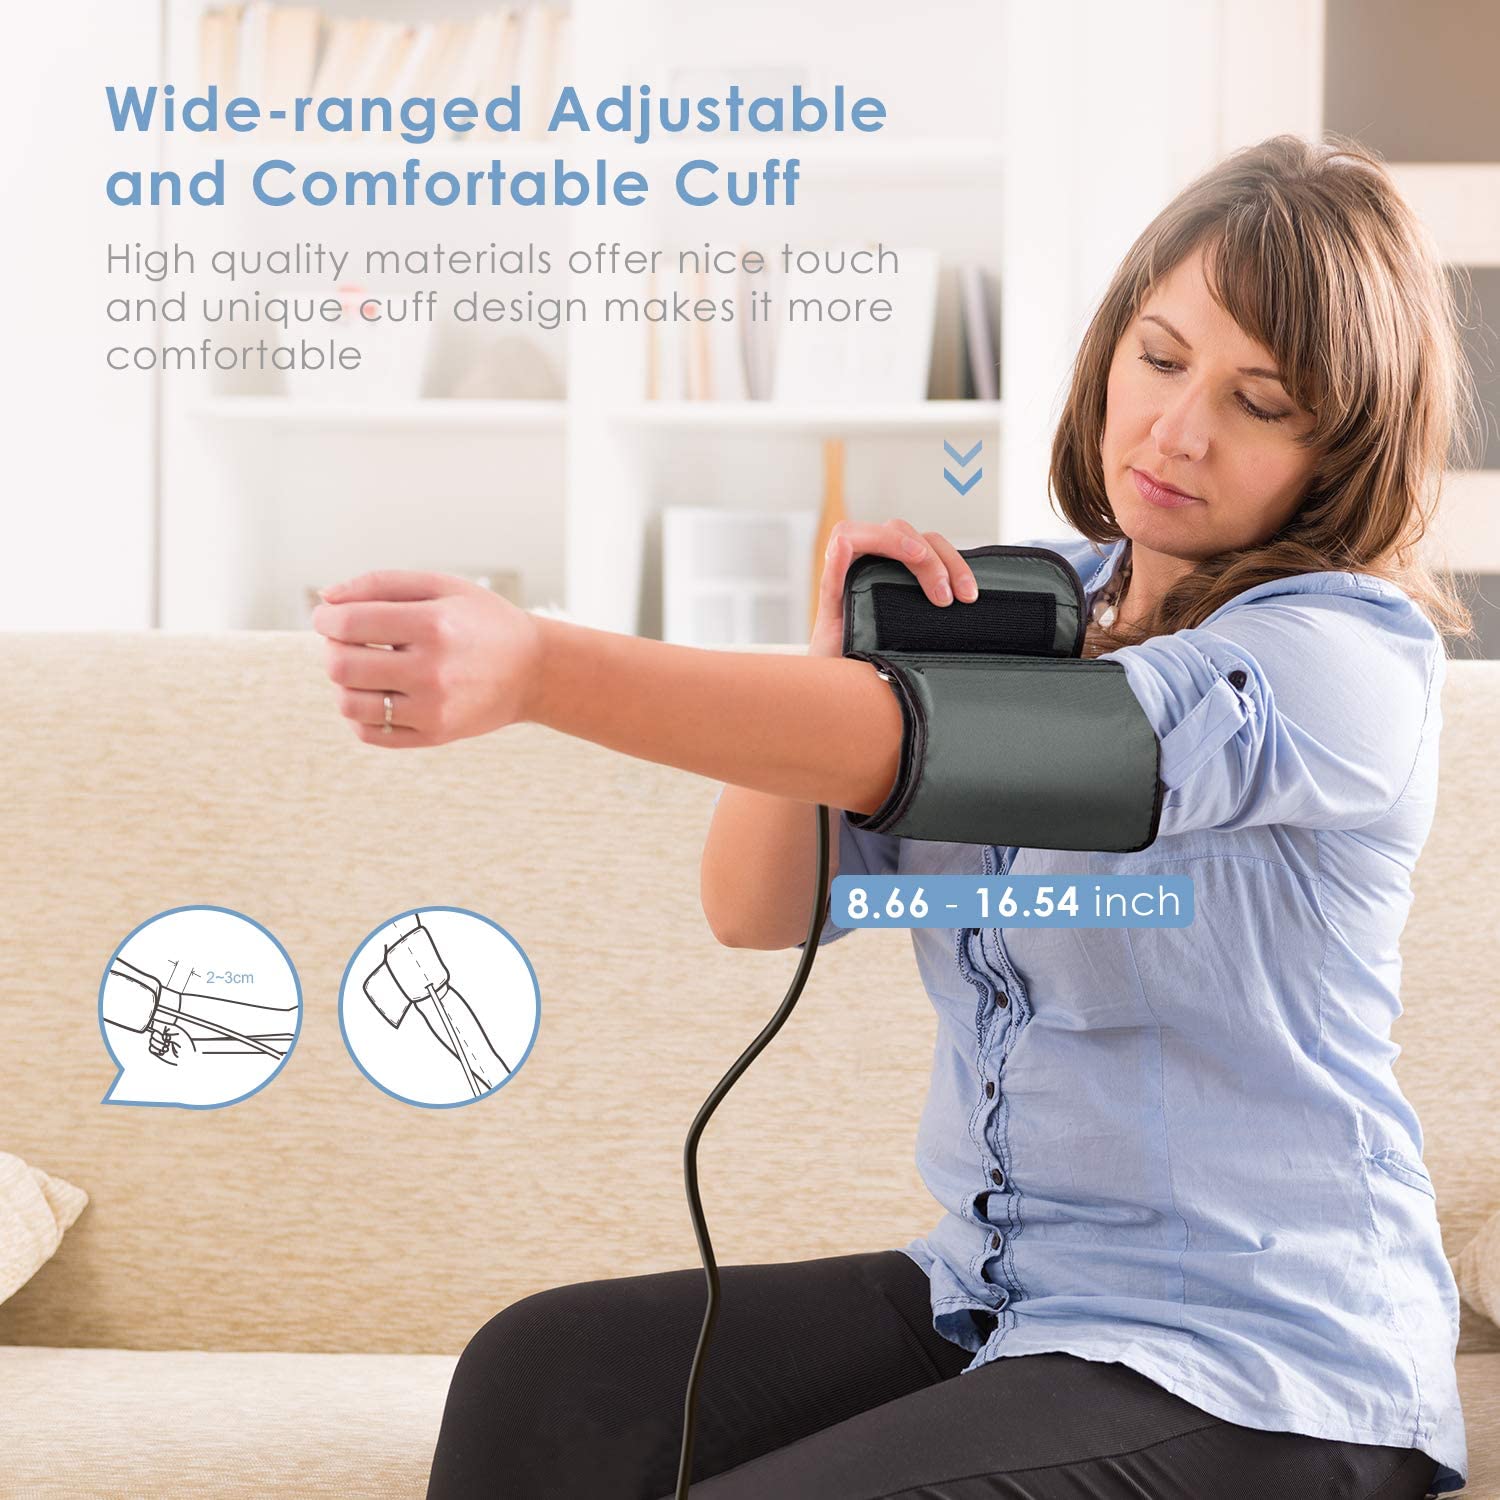 Blood Pressure Monitor. Top 10 Gift Ideas For 70 Years Old Woman in Birthday - 3